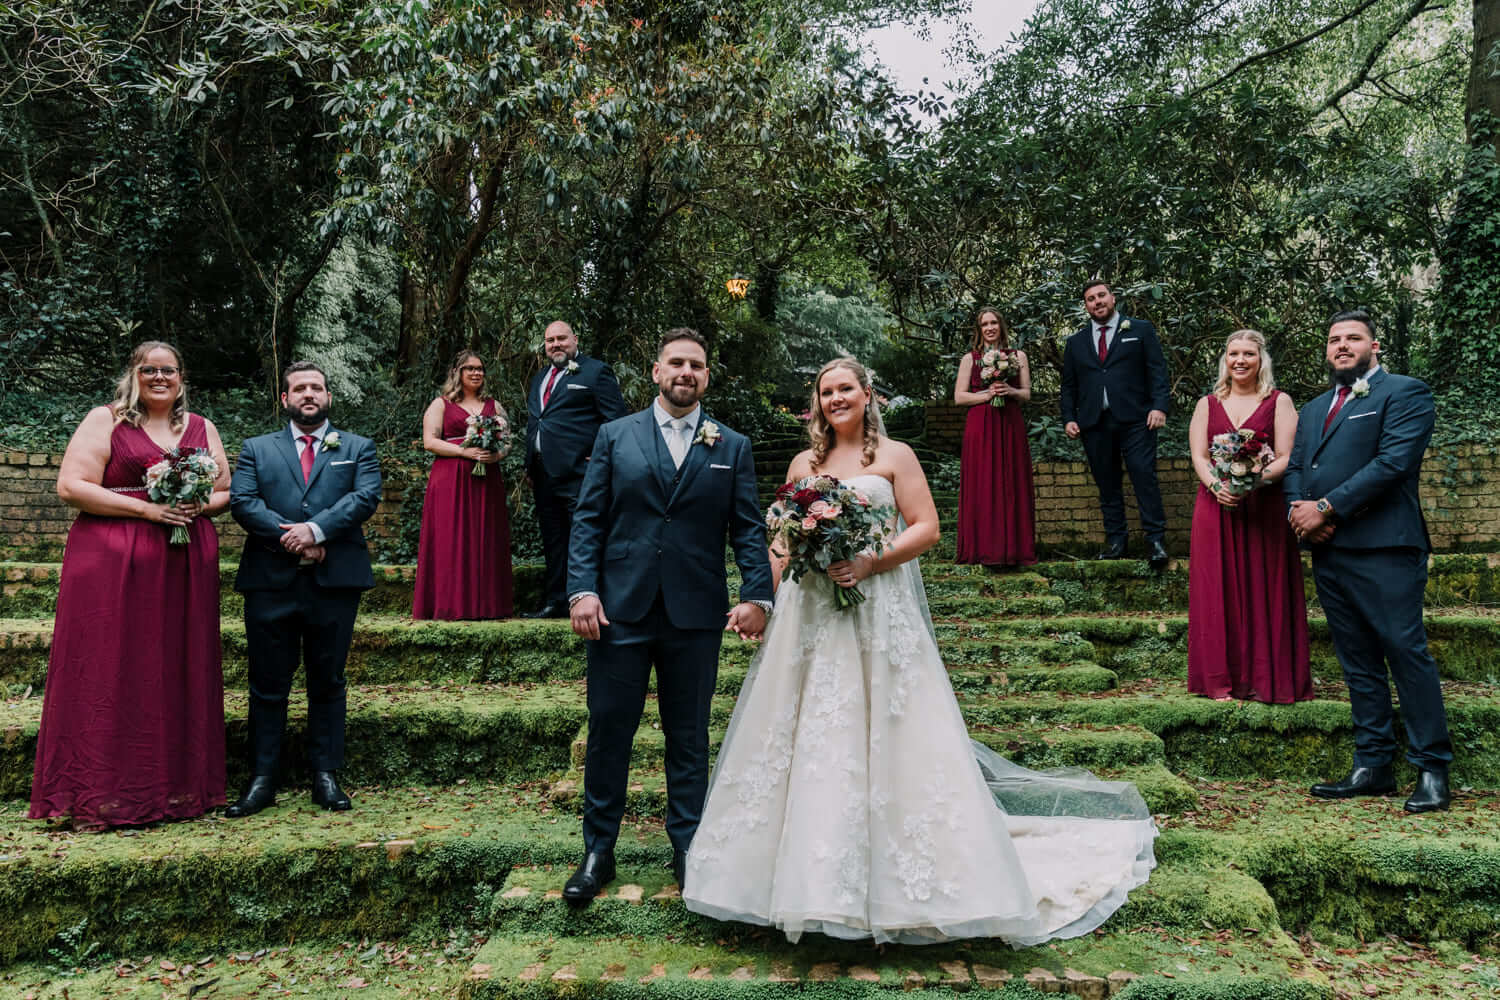 The bridesmaids are wearing burgundy dresses while the groomsmen wears matching ties